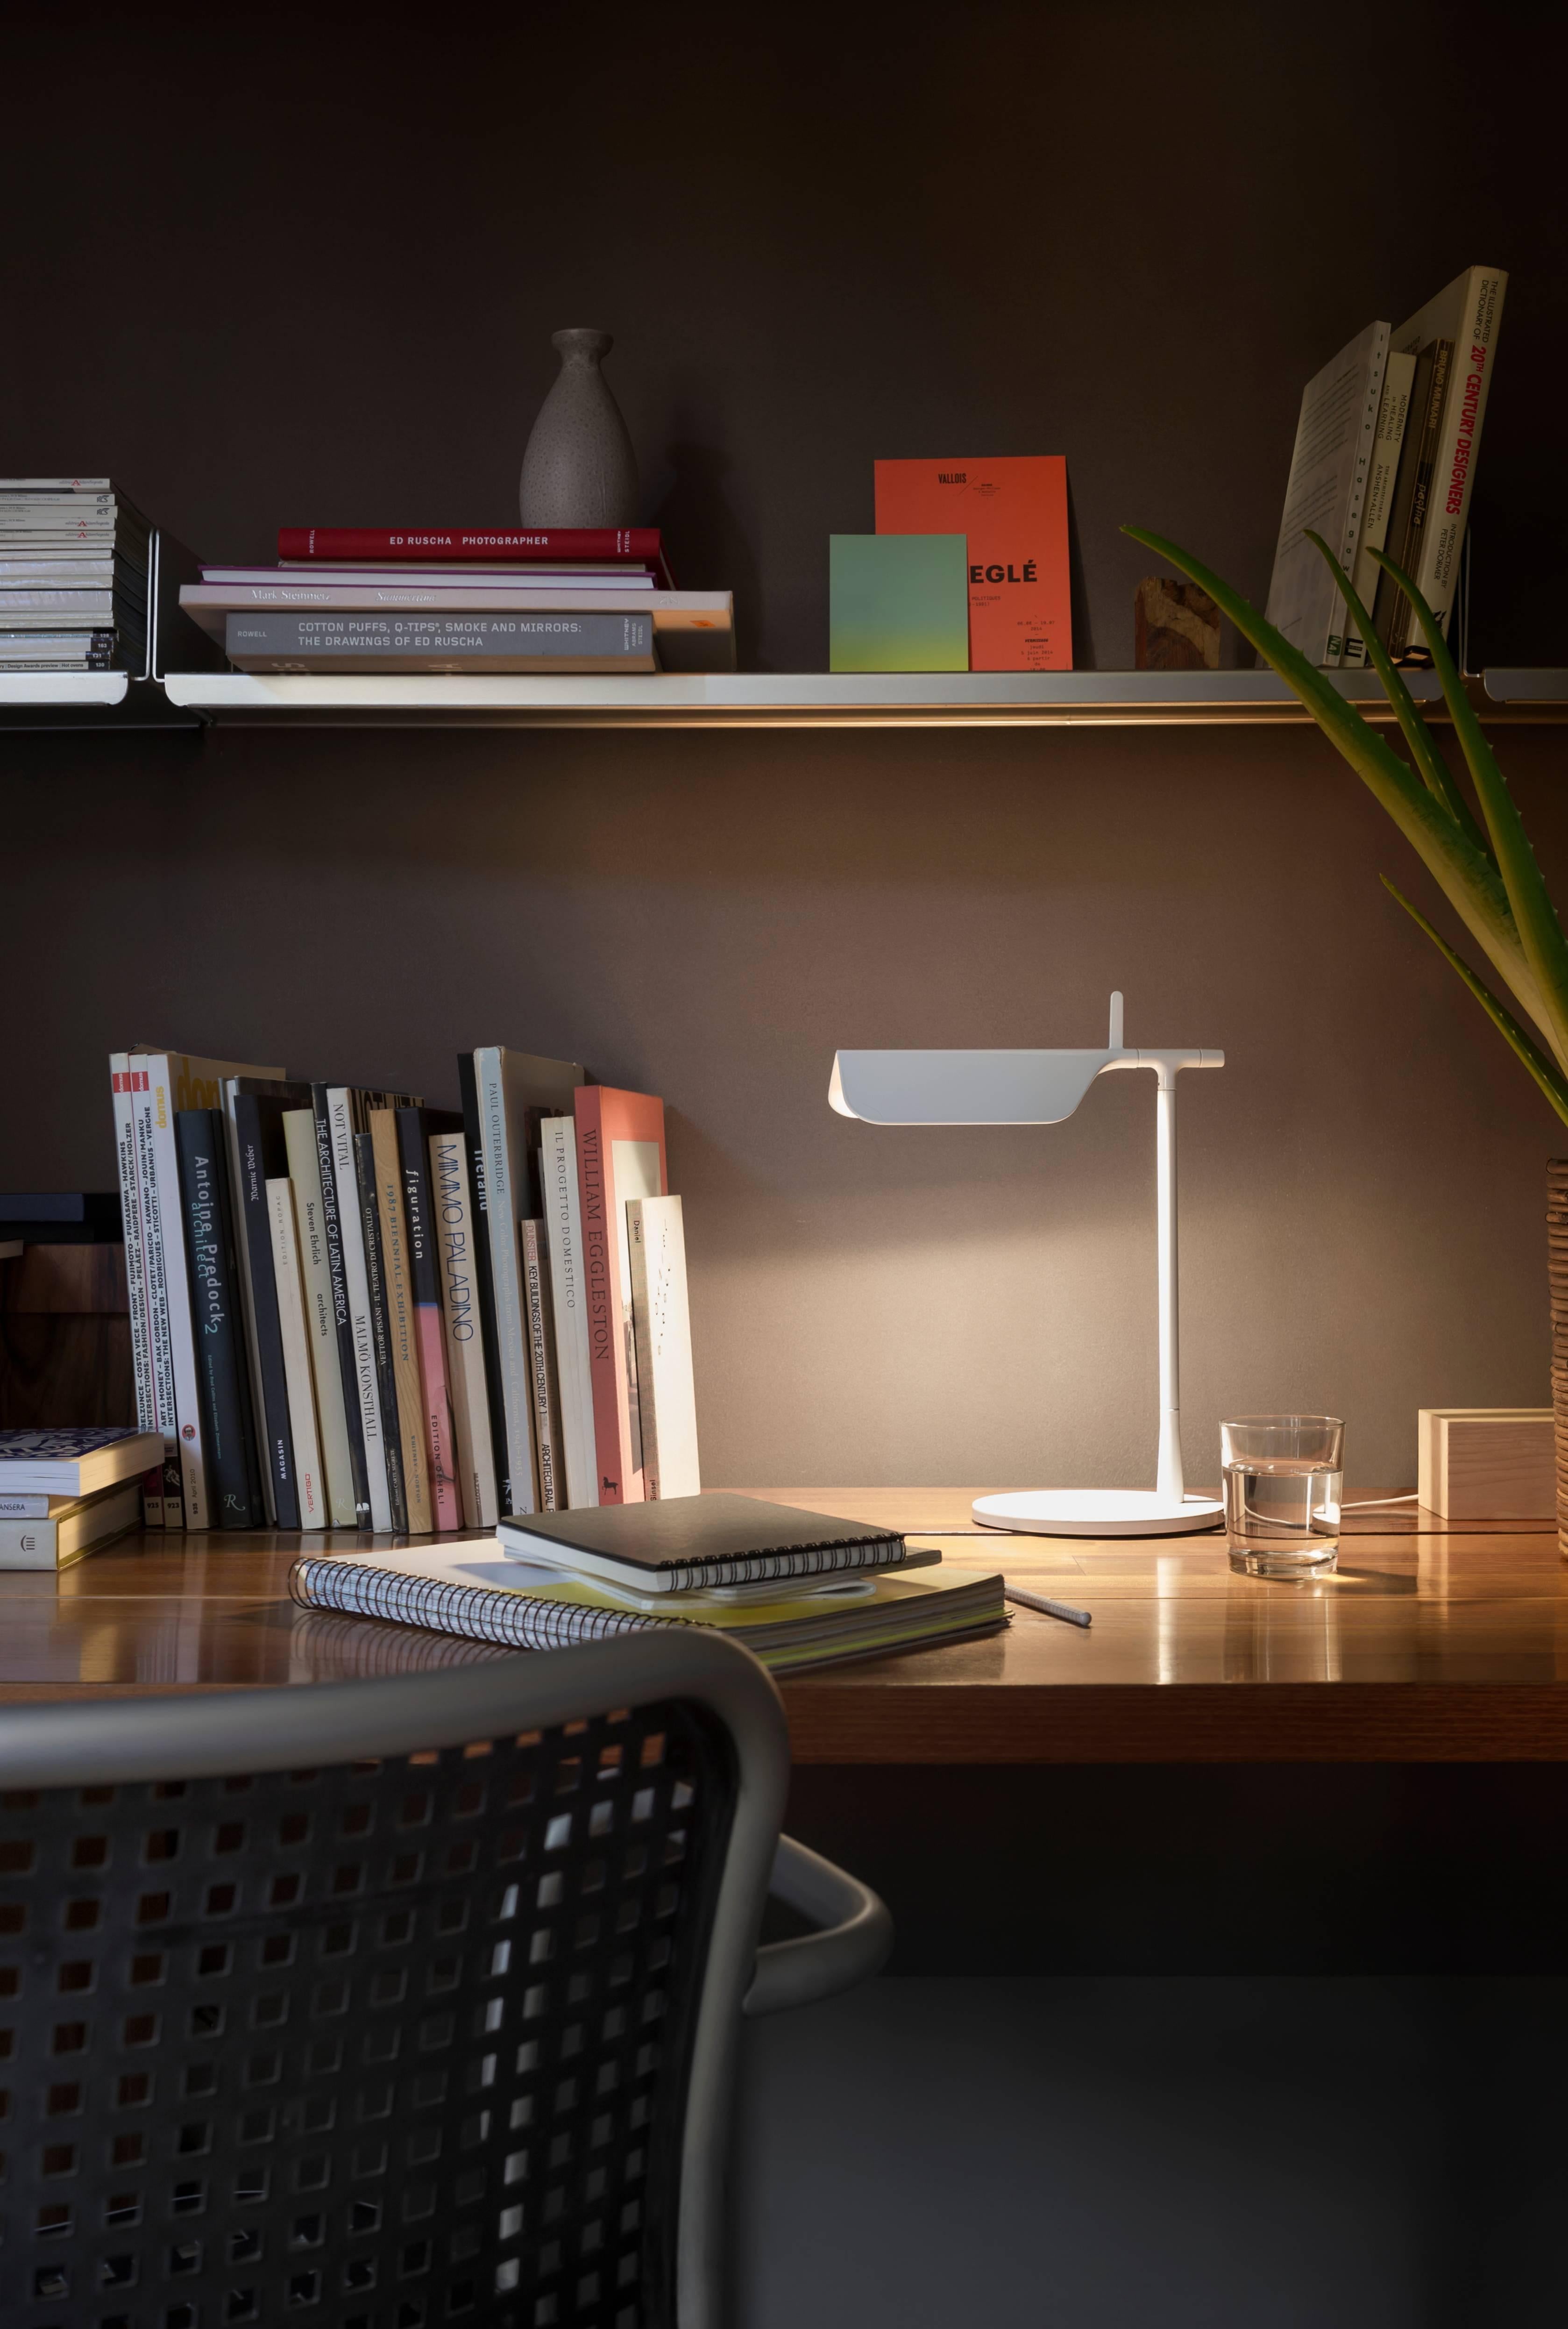 Part of the Tab family created by the design duo of E. Barber and J. Osgerby in 2011, the Tab T table lamp is a tribute to the spirit of innovation. This modern style has an adjustable head with a ±45-degree rotation capability and a body painted